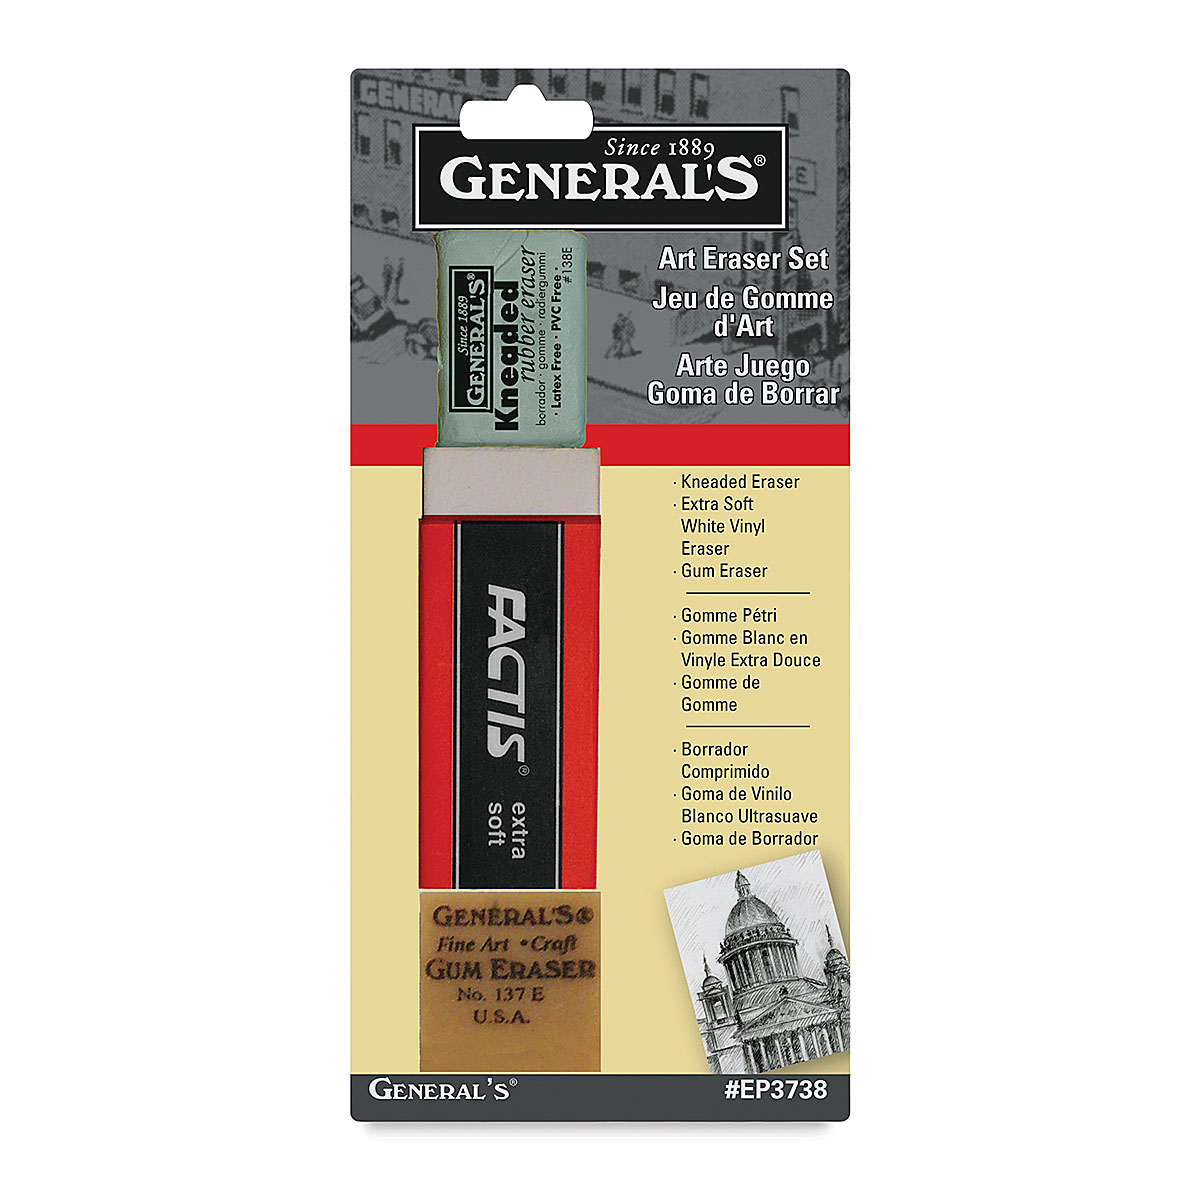 General's Pencil Kneaded Erasers